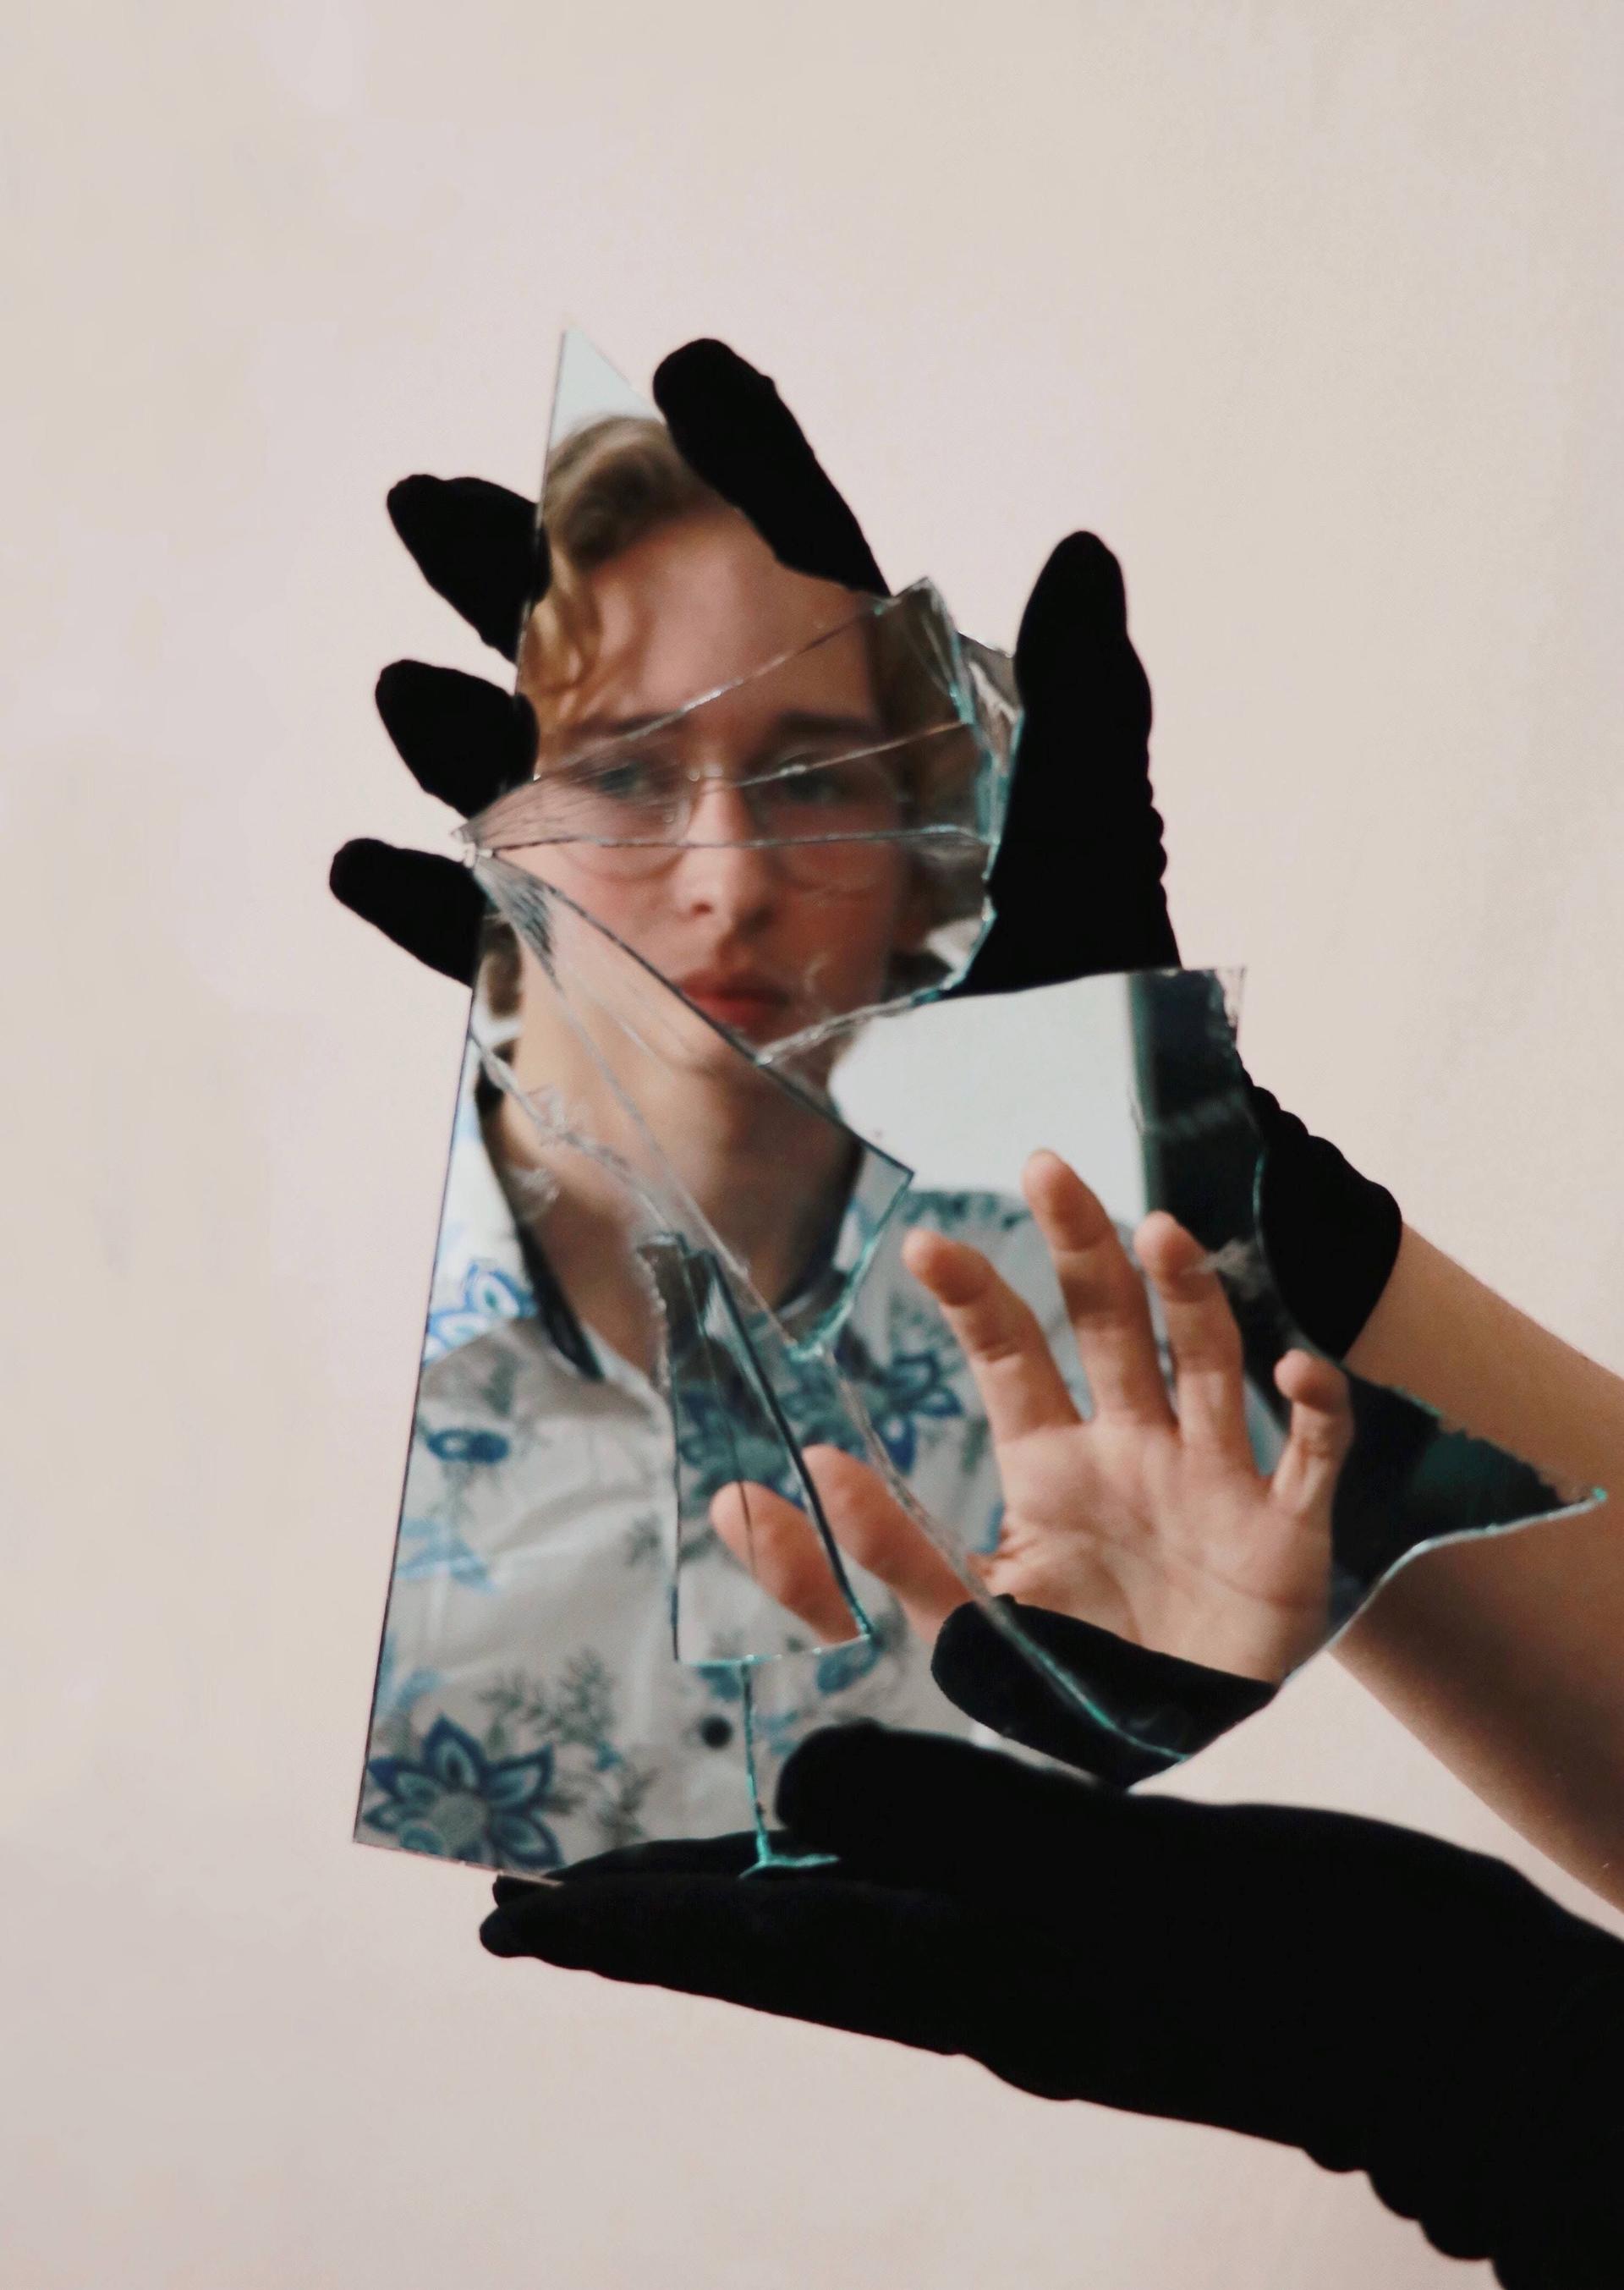 A person is looking into a piece of a mirror that another hand with black gloves is holding